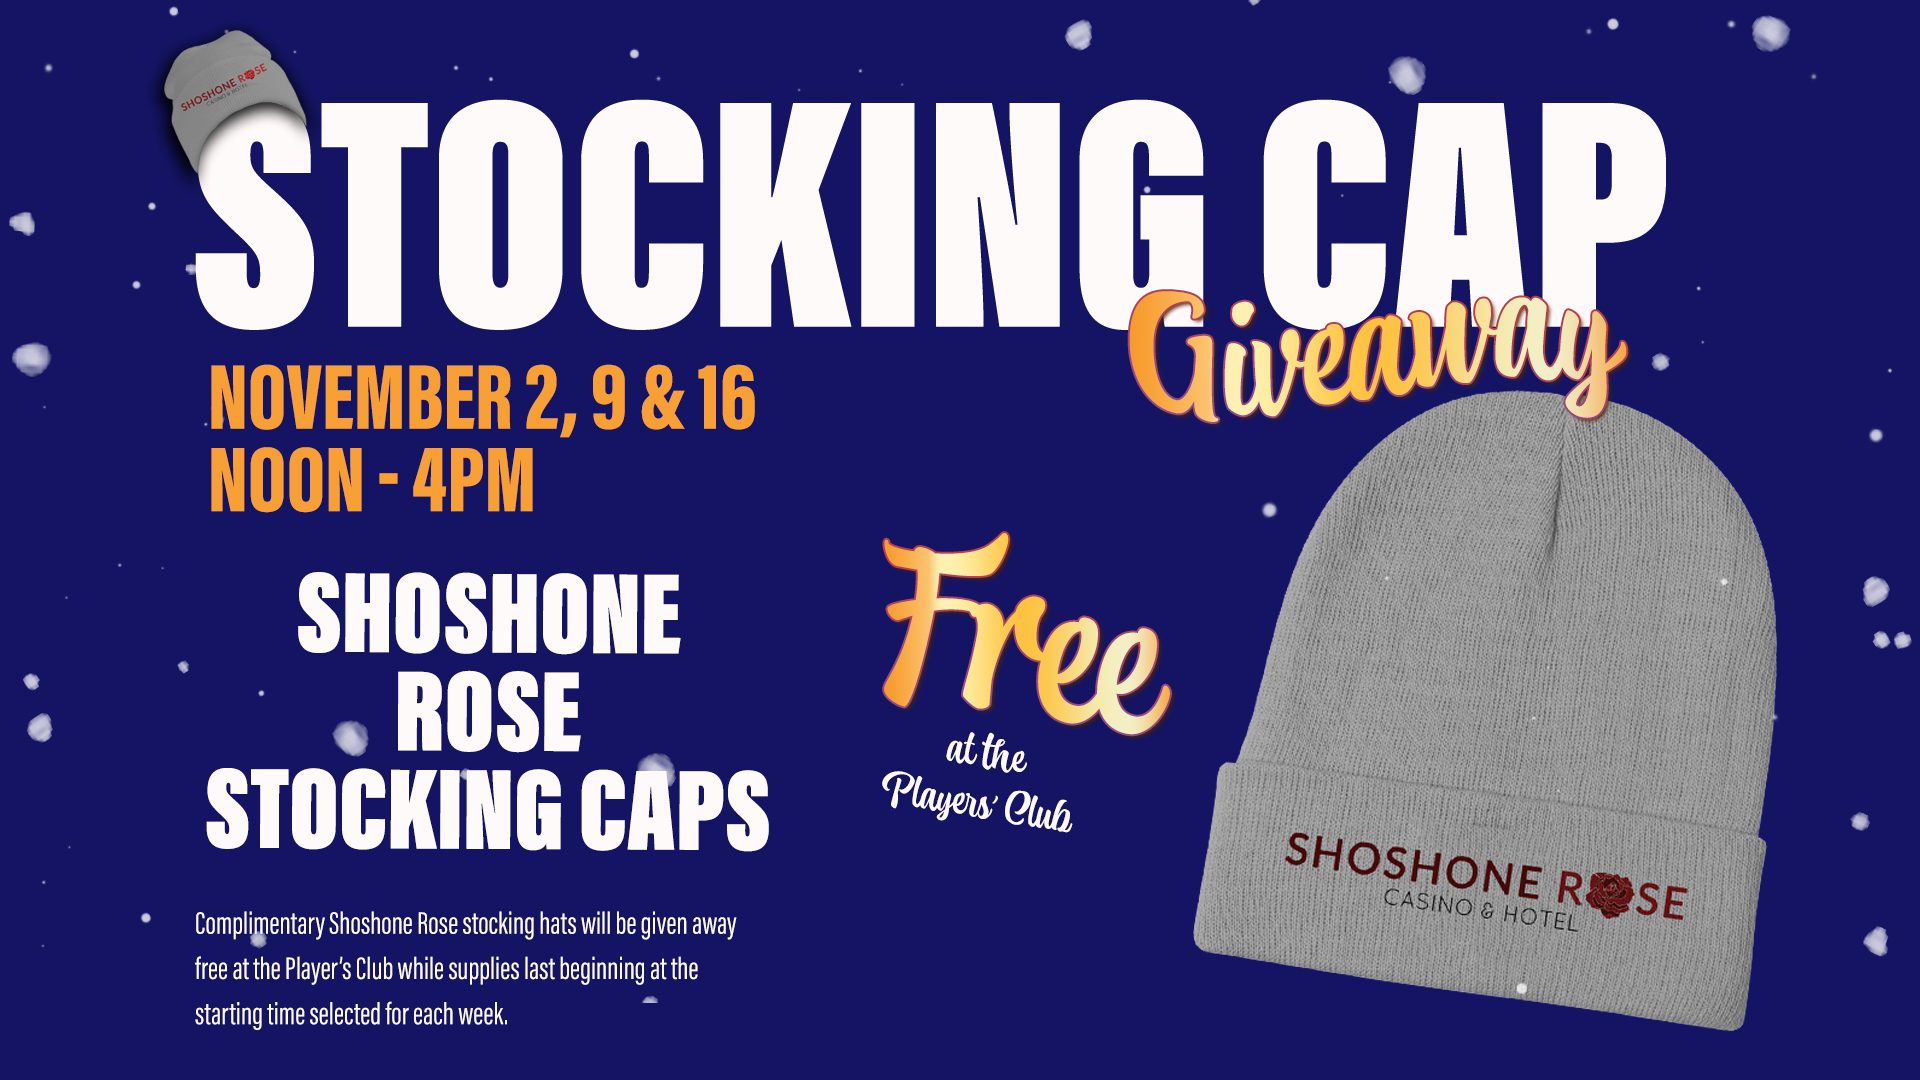 Promotional banner for a "stocking cap giveaway" event at shoshone rose casino & hotel with specific dates and times.